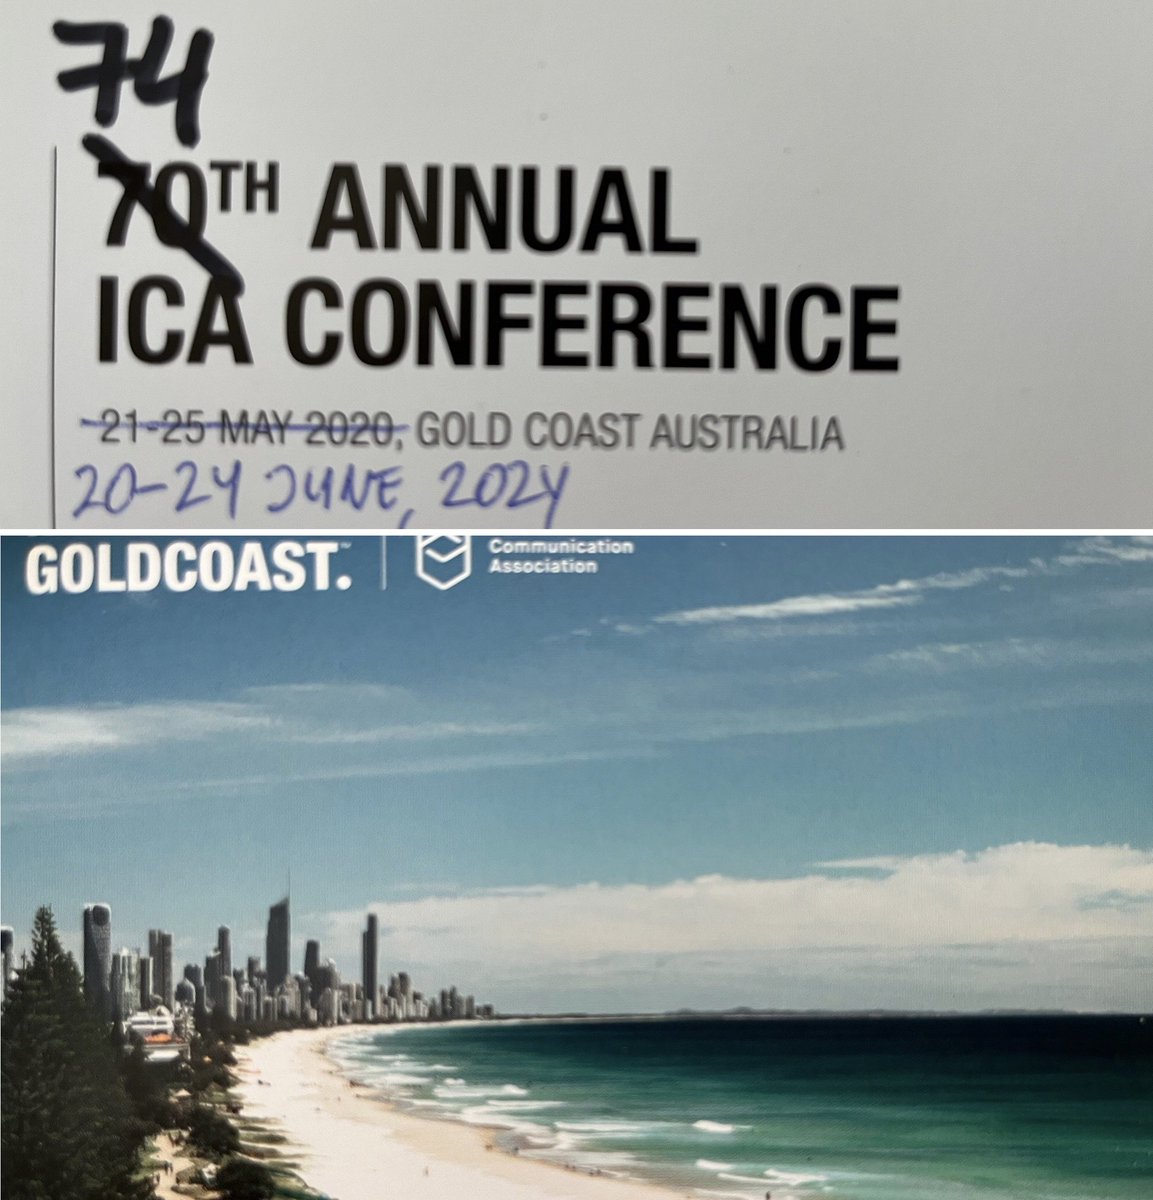 Fixed it. #ica20 —> #ica24
Can’t wait after the great #ica23 edition